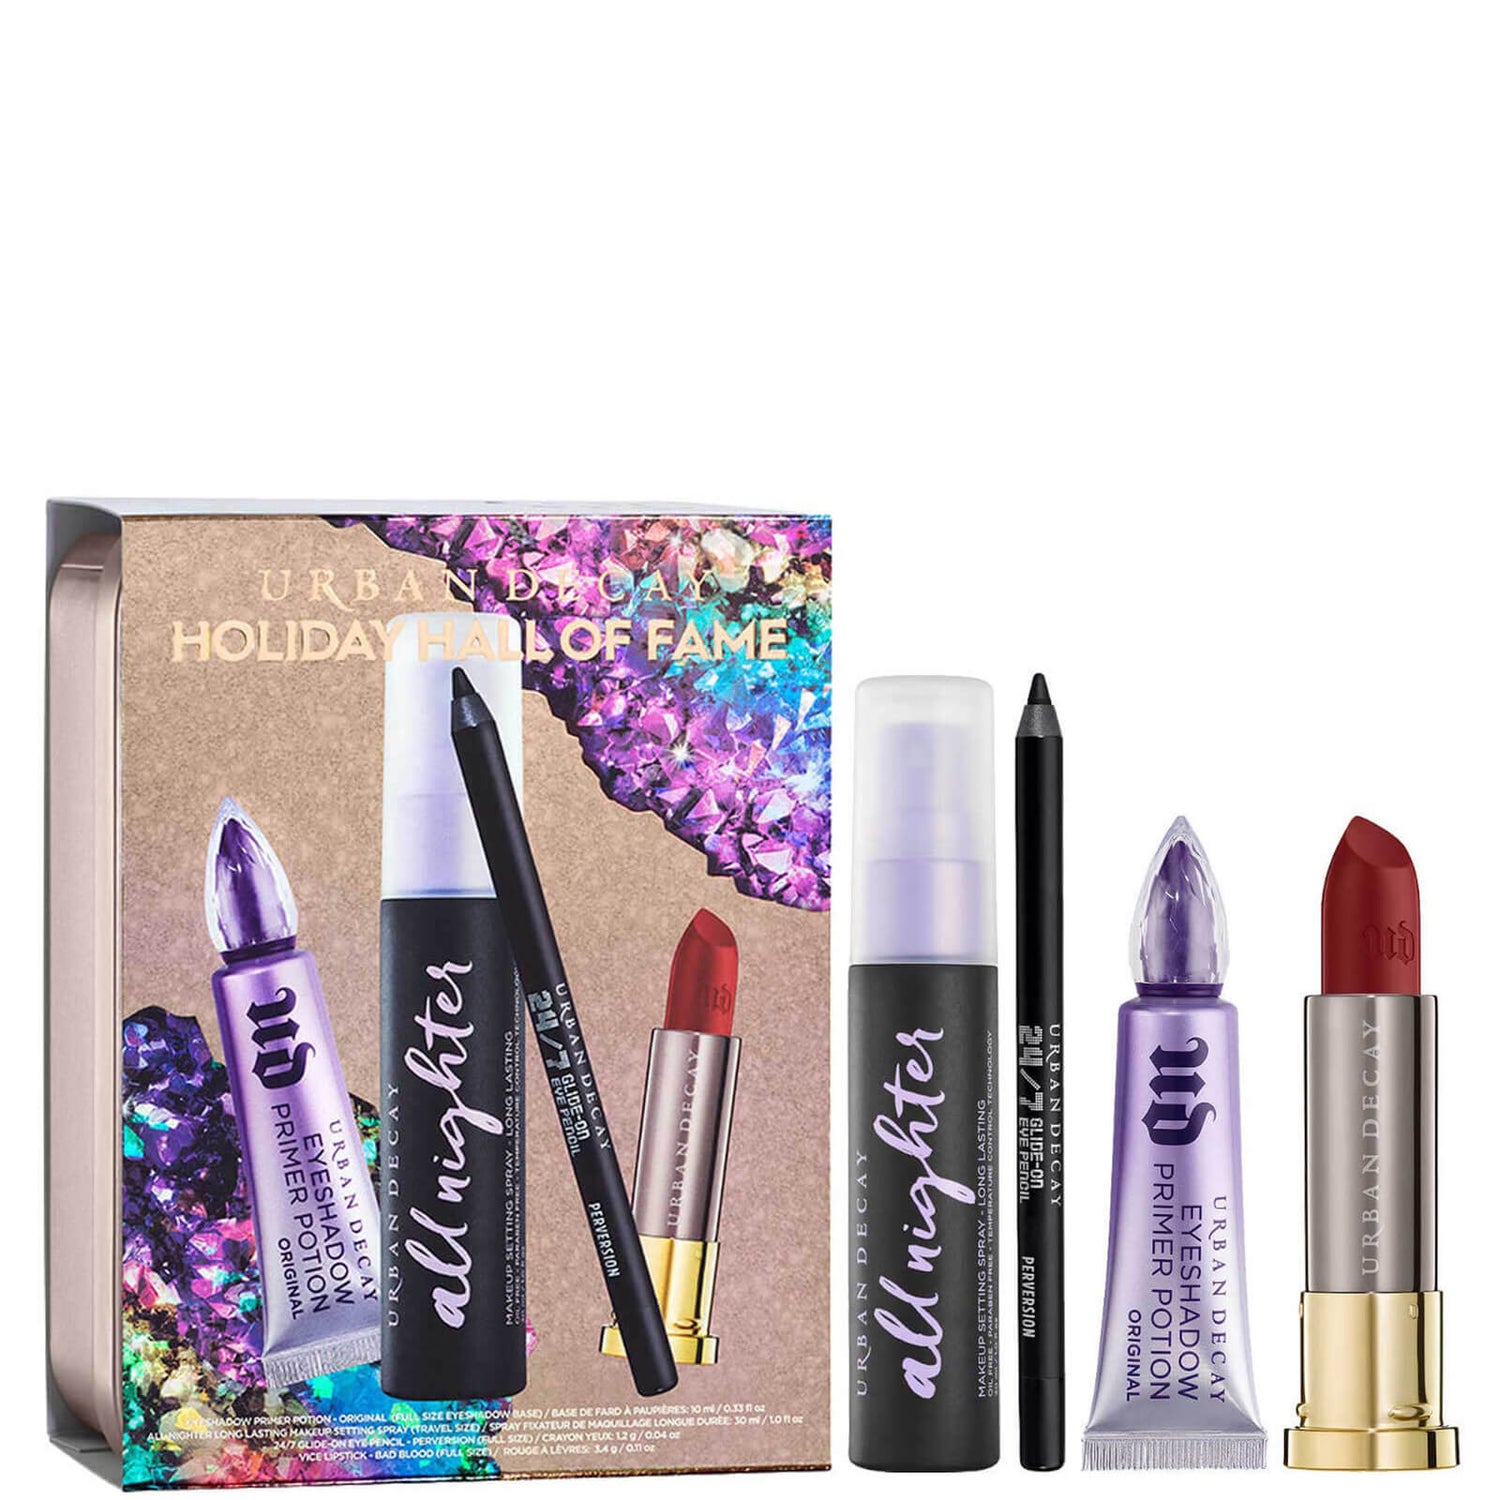 Urban Decay Best Sellers Holiday Set (Worth £79.50)